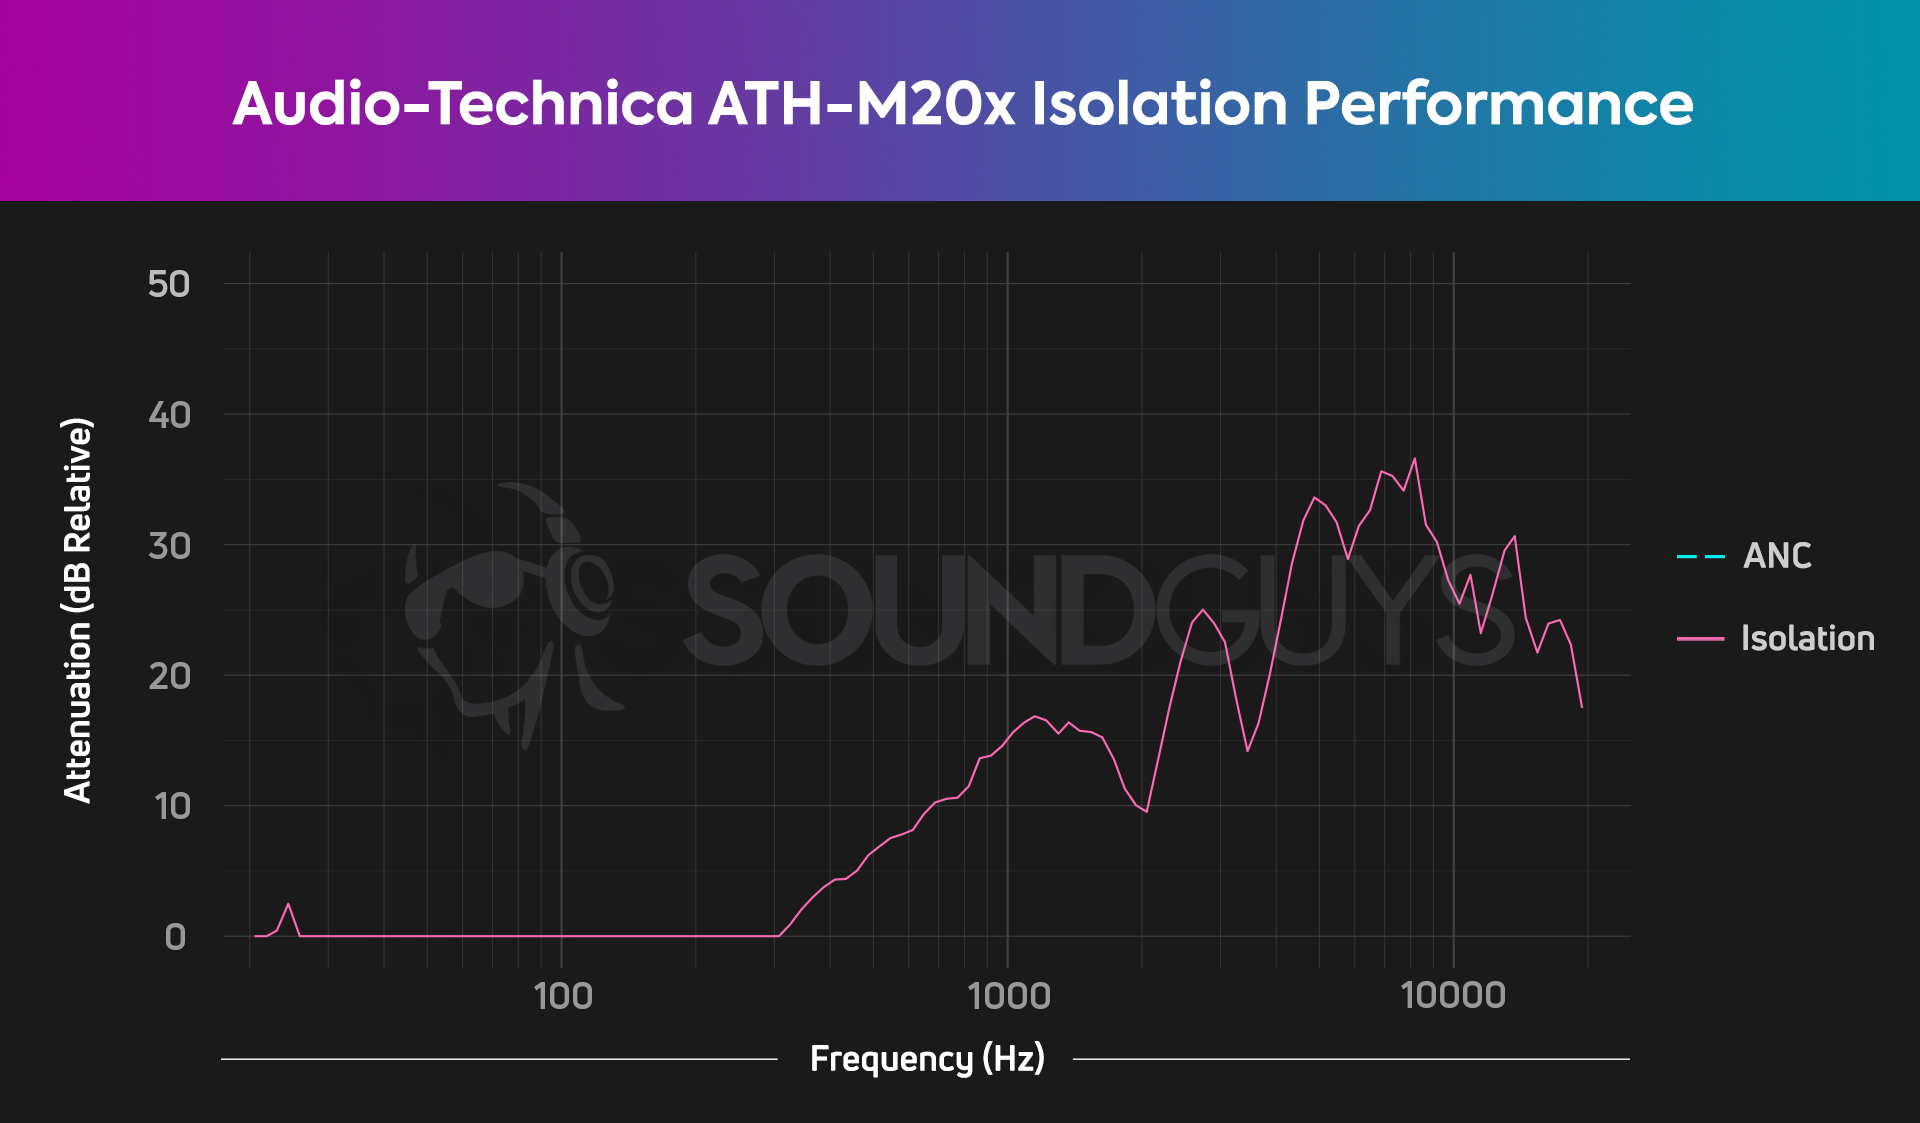 Chart shows the isolation performance of the Audio-Technica ATH-M20x.